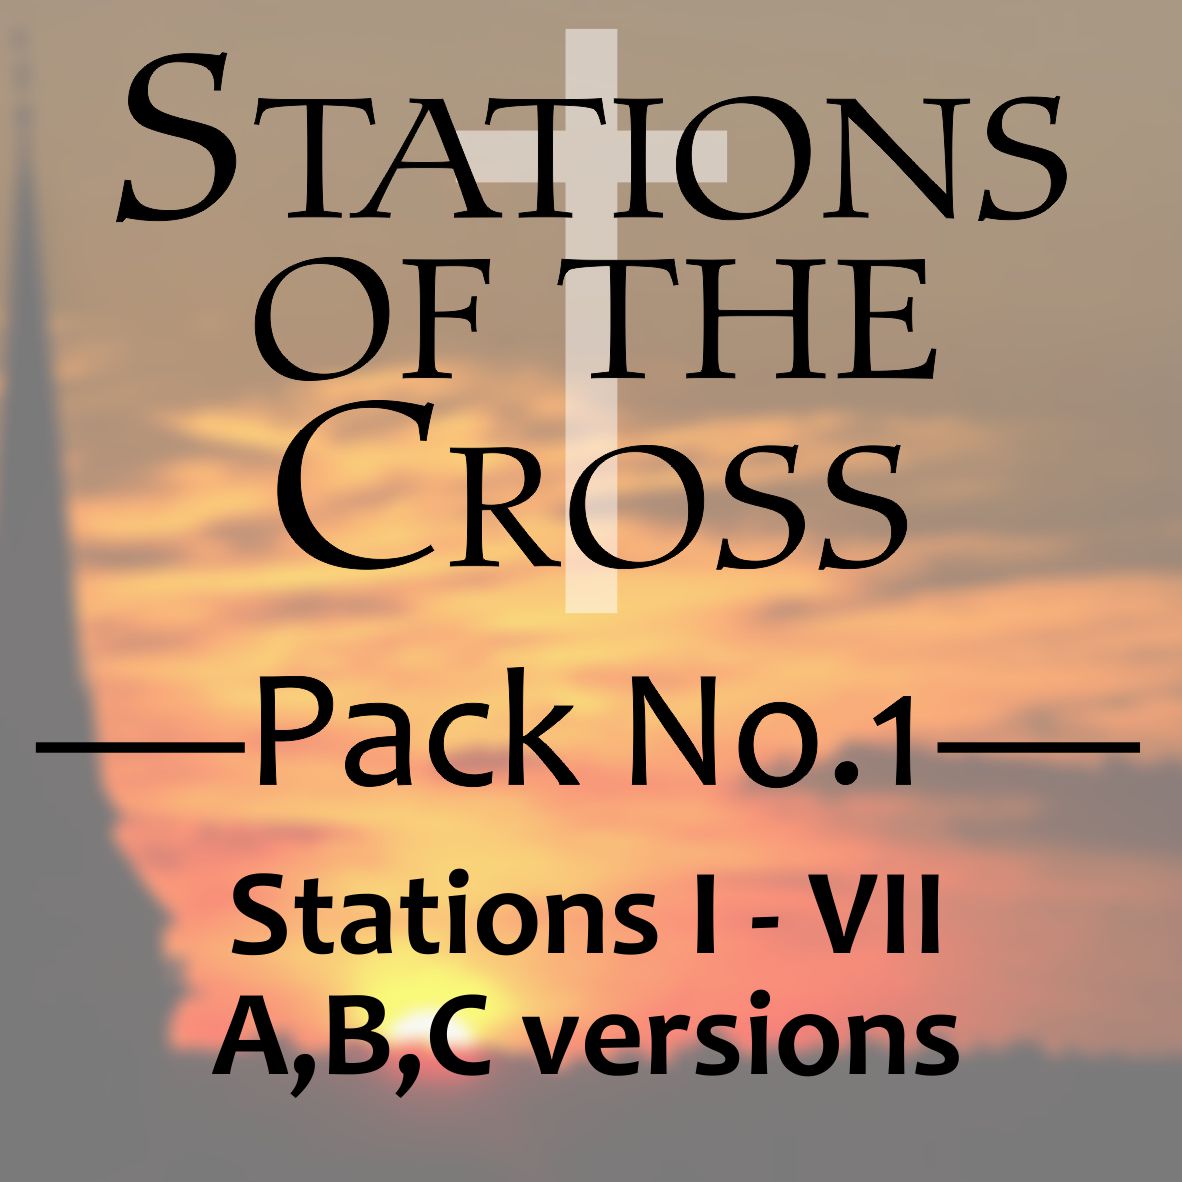 Stations of the Cross - I-VII